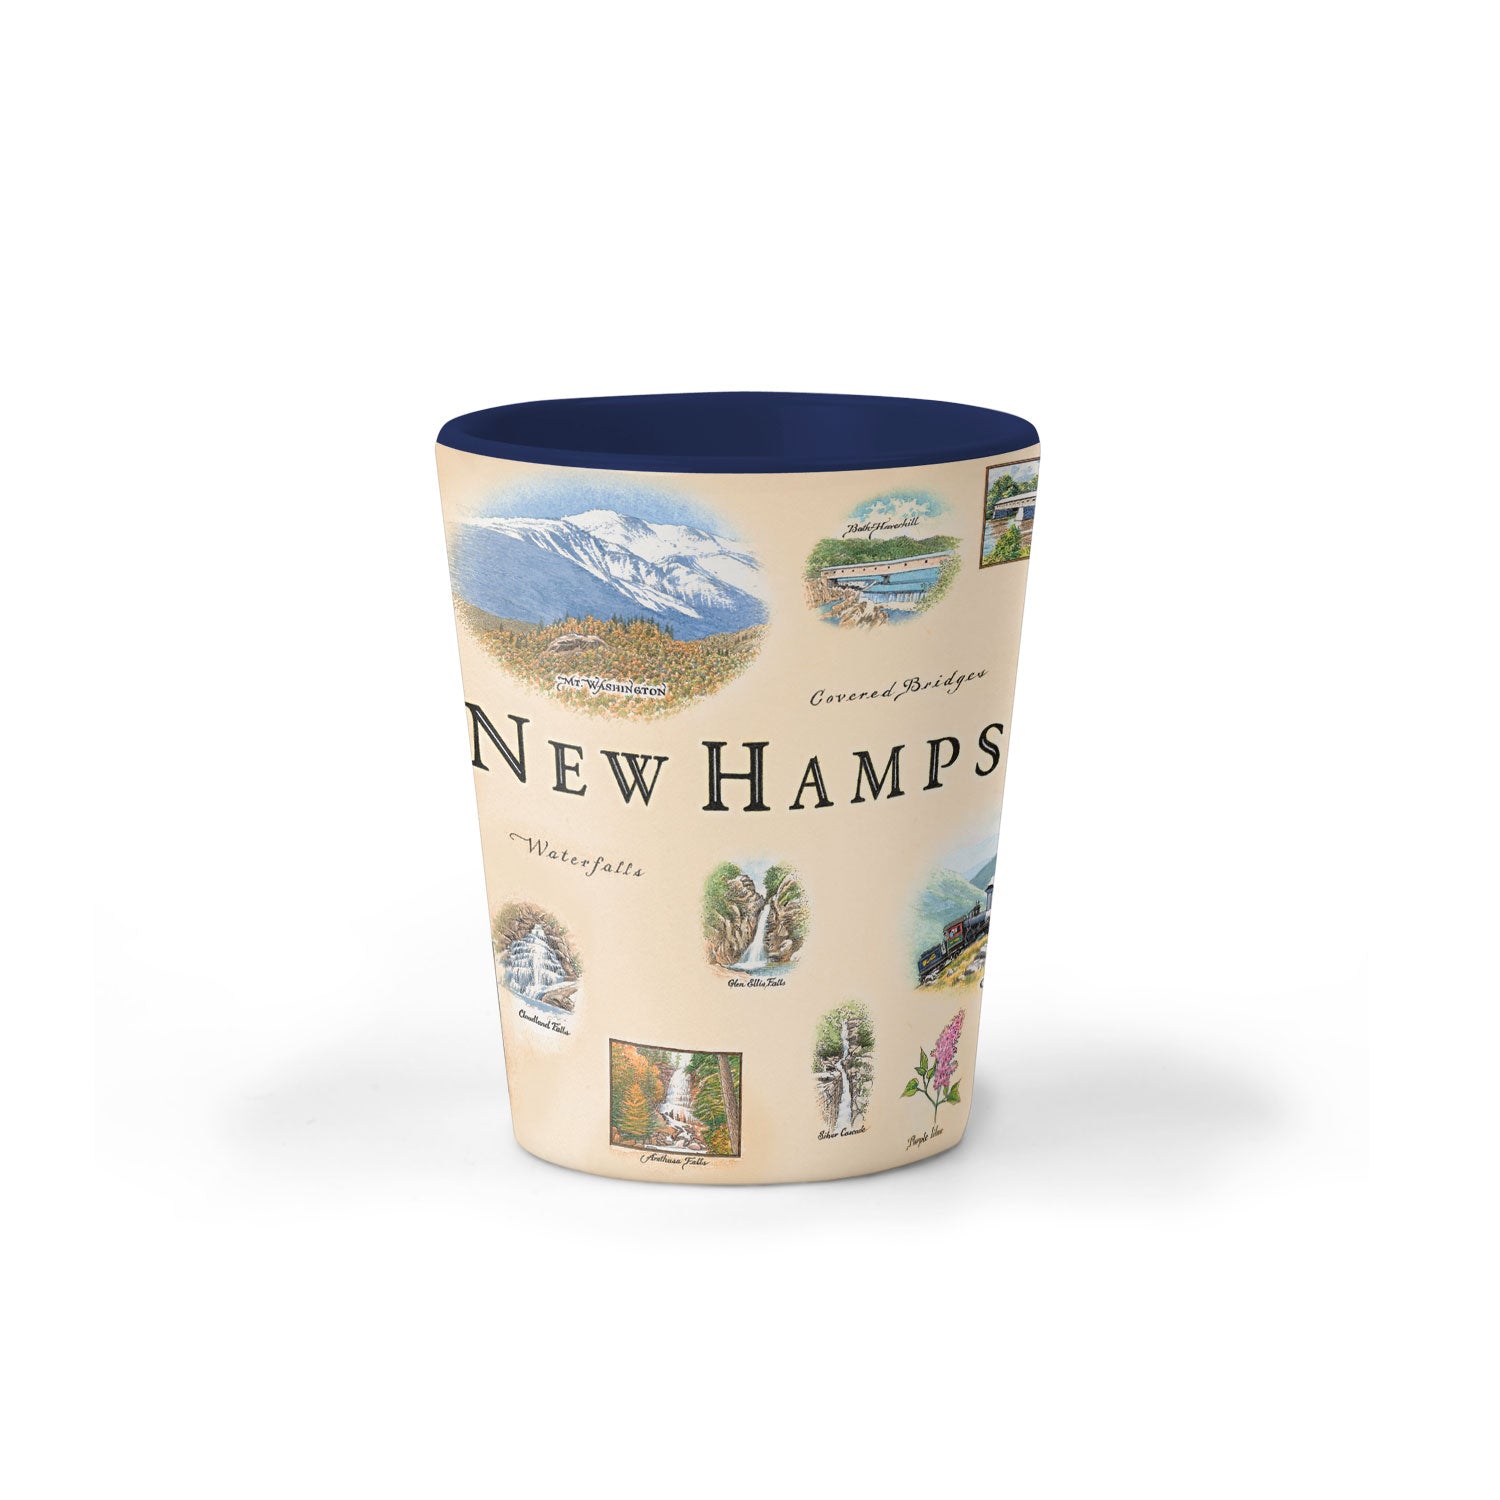 New Hampshire state map ceramic shot glass. The cup features black bears, deer, sailboats, moose, waterfalls, the Atlantic Ocean, Franconia Notch State Park, Mount Washington, fly fishing, and Crawford Notch.